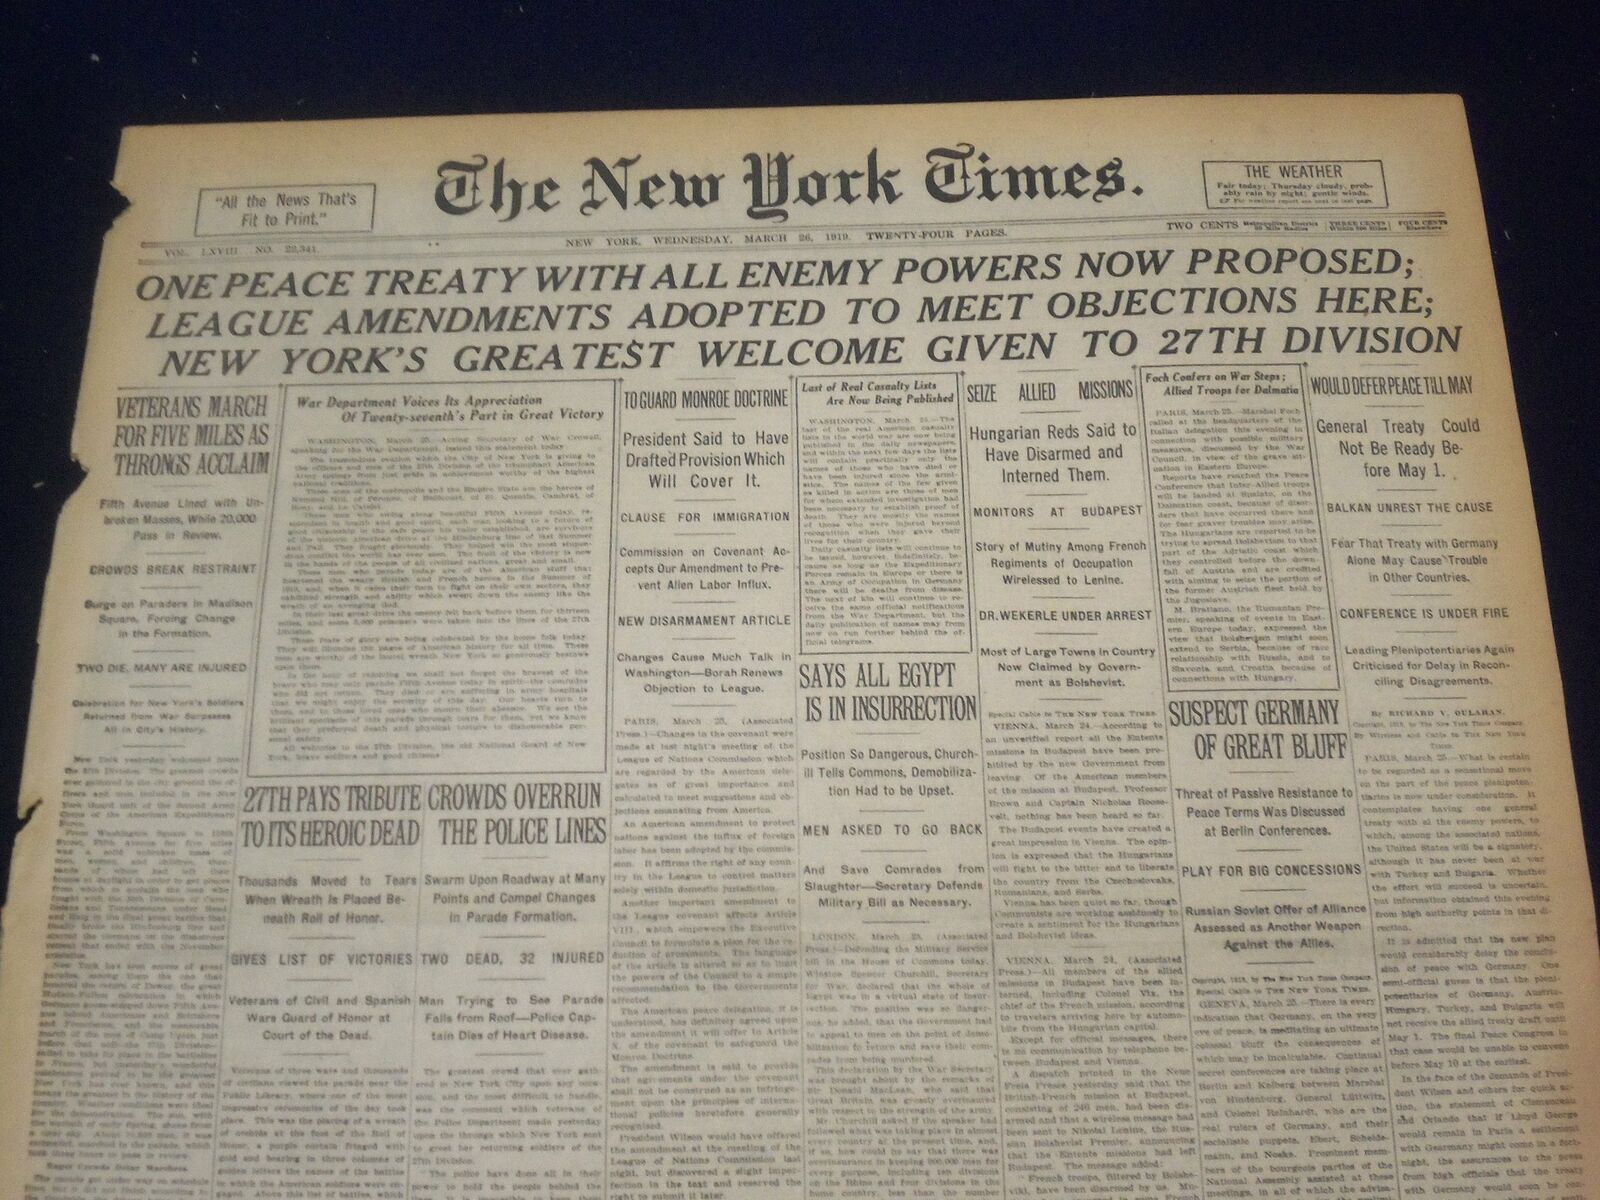 1919 MARCH 26 NEW YORK TIMES - GREATEST WELCOME GIVEN TO 27TH DIVISION - NT 9282